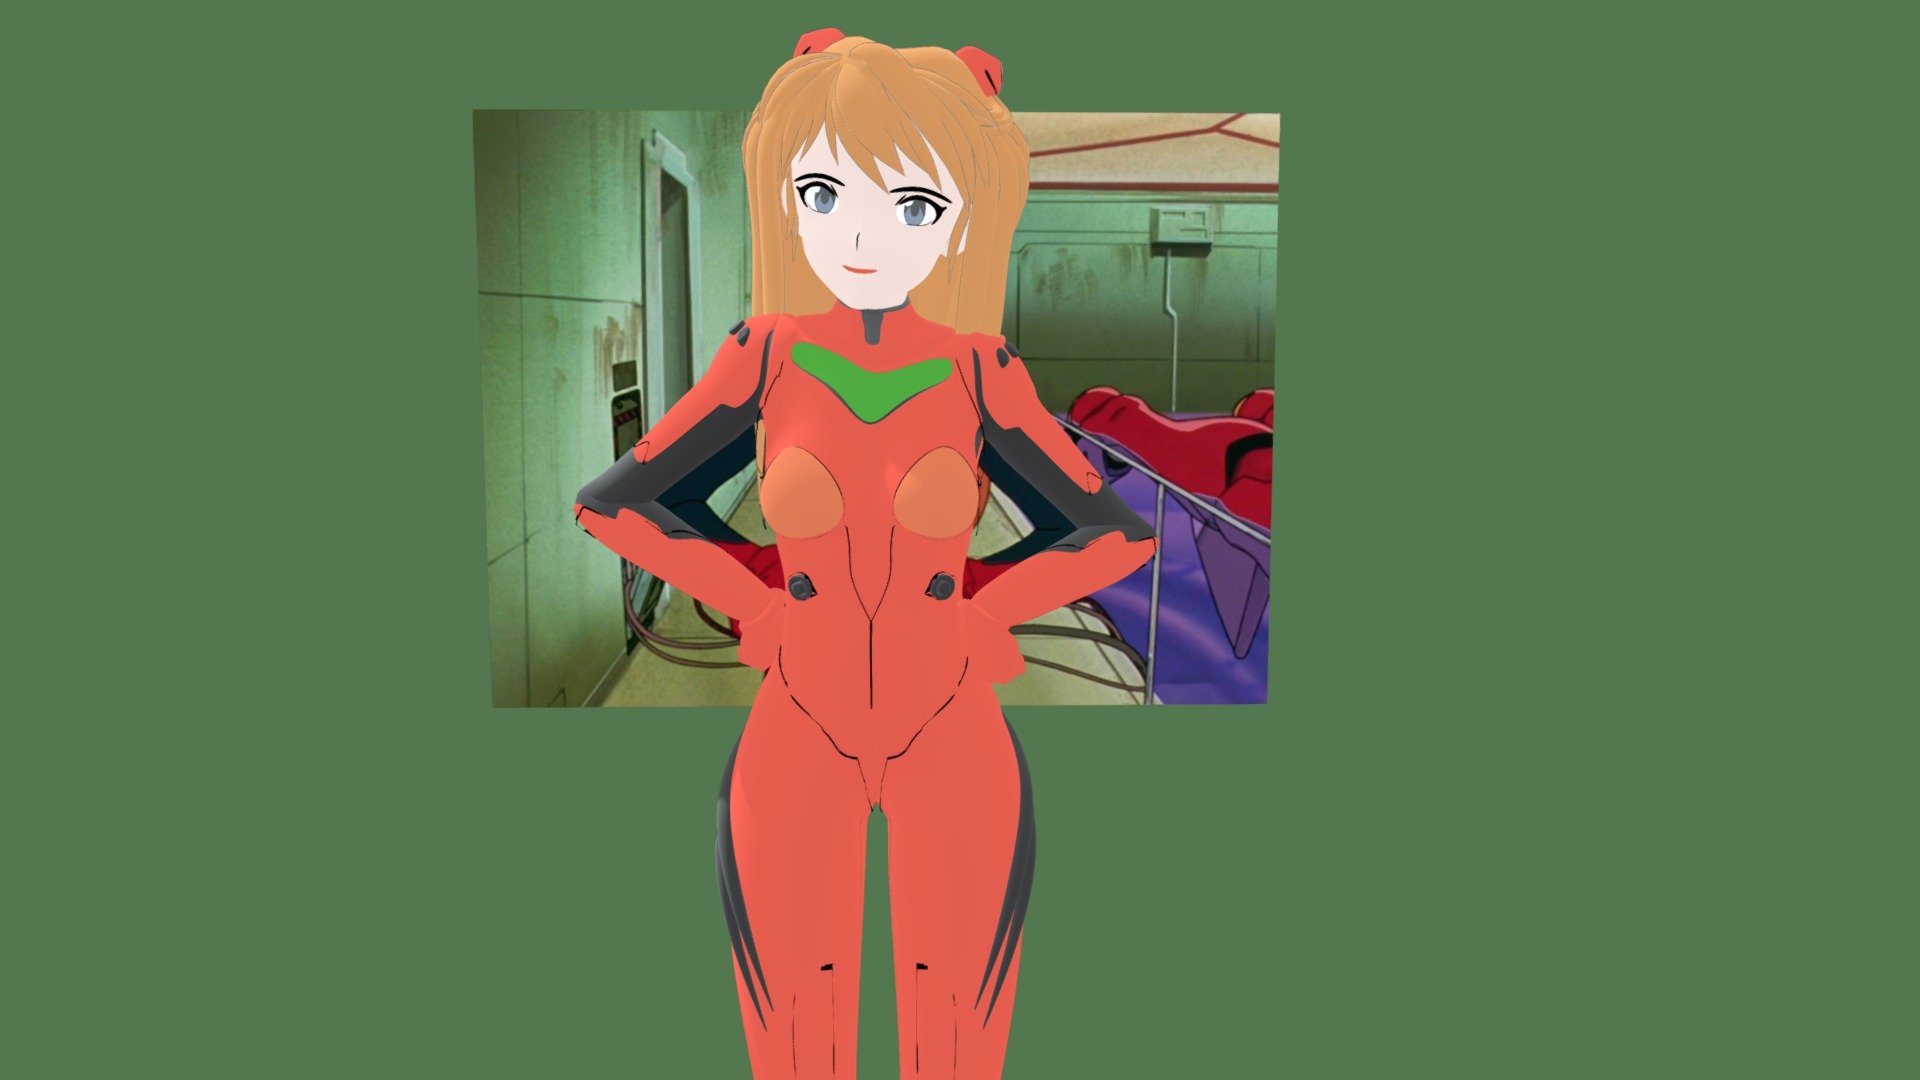 3d model of the character Asuka Langley from the anime Neon Genesis Evangelion
All materials are 100% procedural, but some of them don't translate well to an image texture for this purpose lol
The rigging isn't great for animating, but for posing only - Asuka with the Eva Suit Rigged - 3D model by de.l.uxe_kid (@deluxe_kid) 3d model